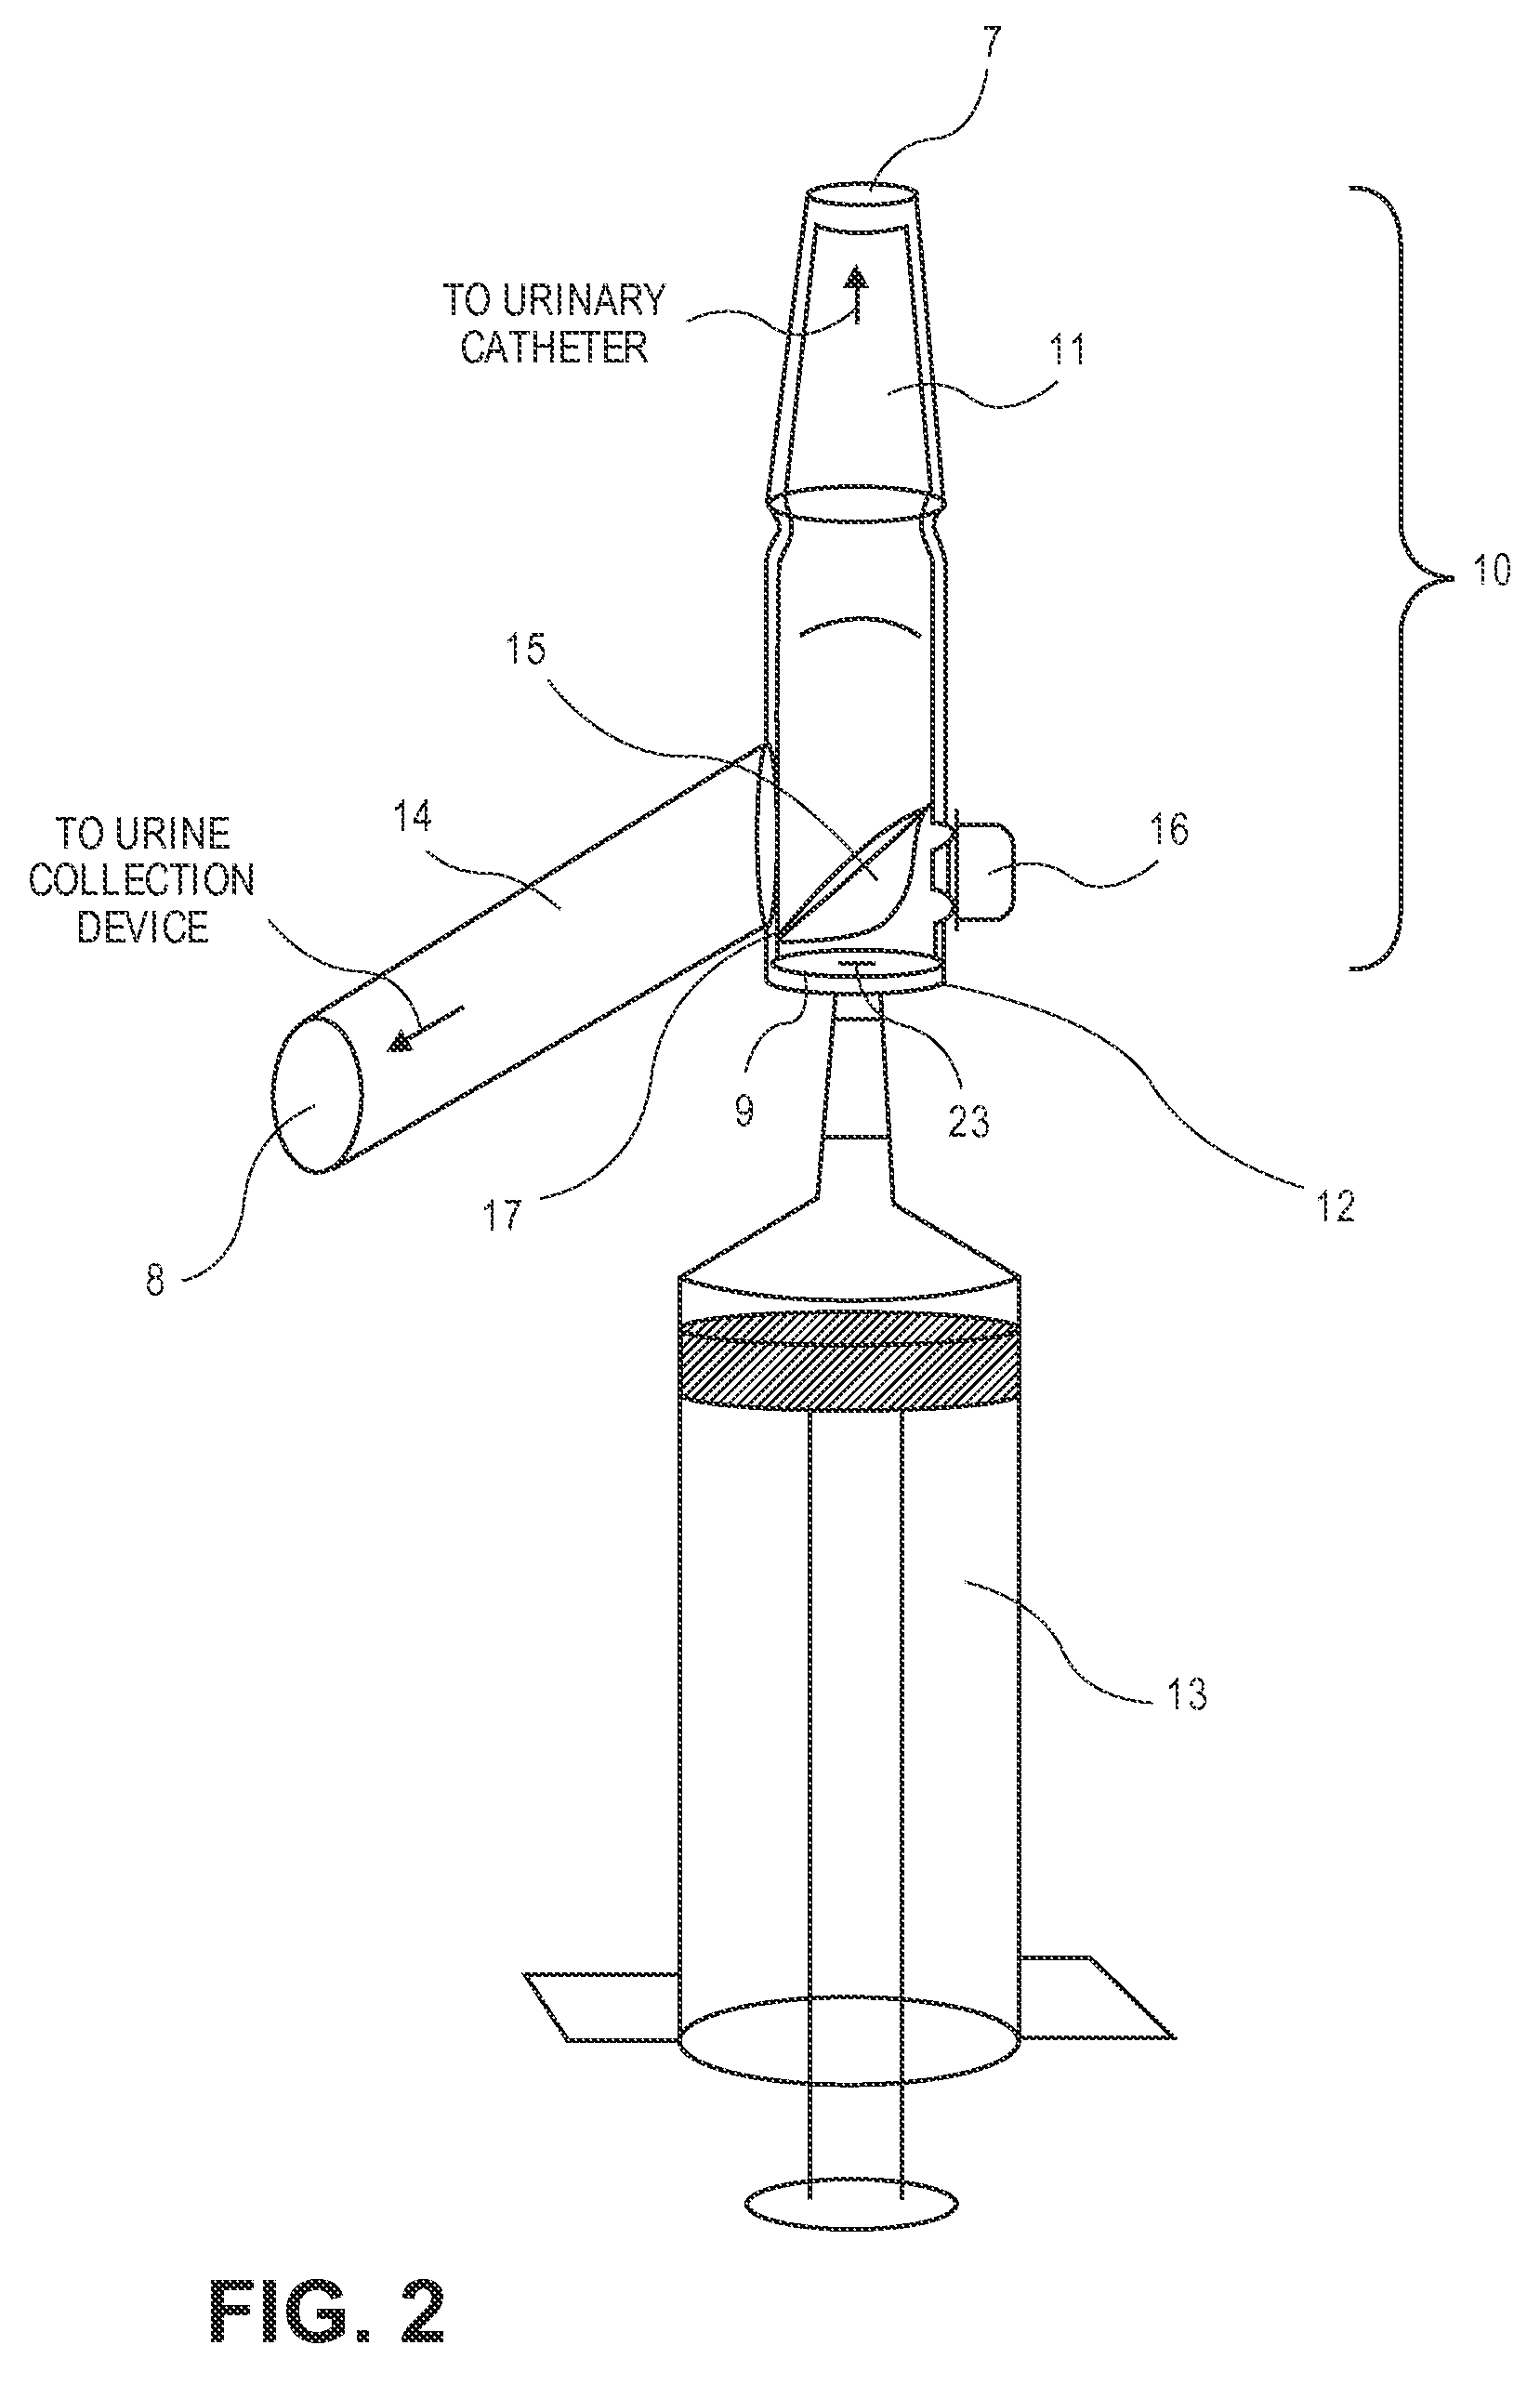 Methods and devices for aseptic irrigation, urine sampling, and flow control of urine from a catheterized bladder